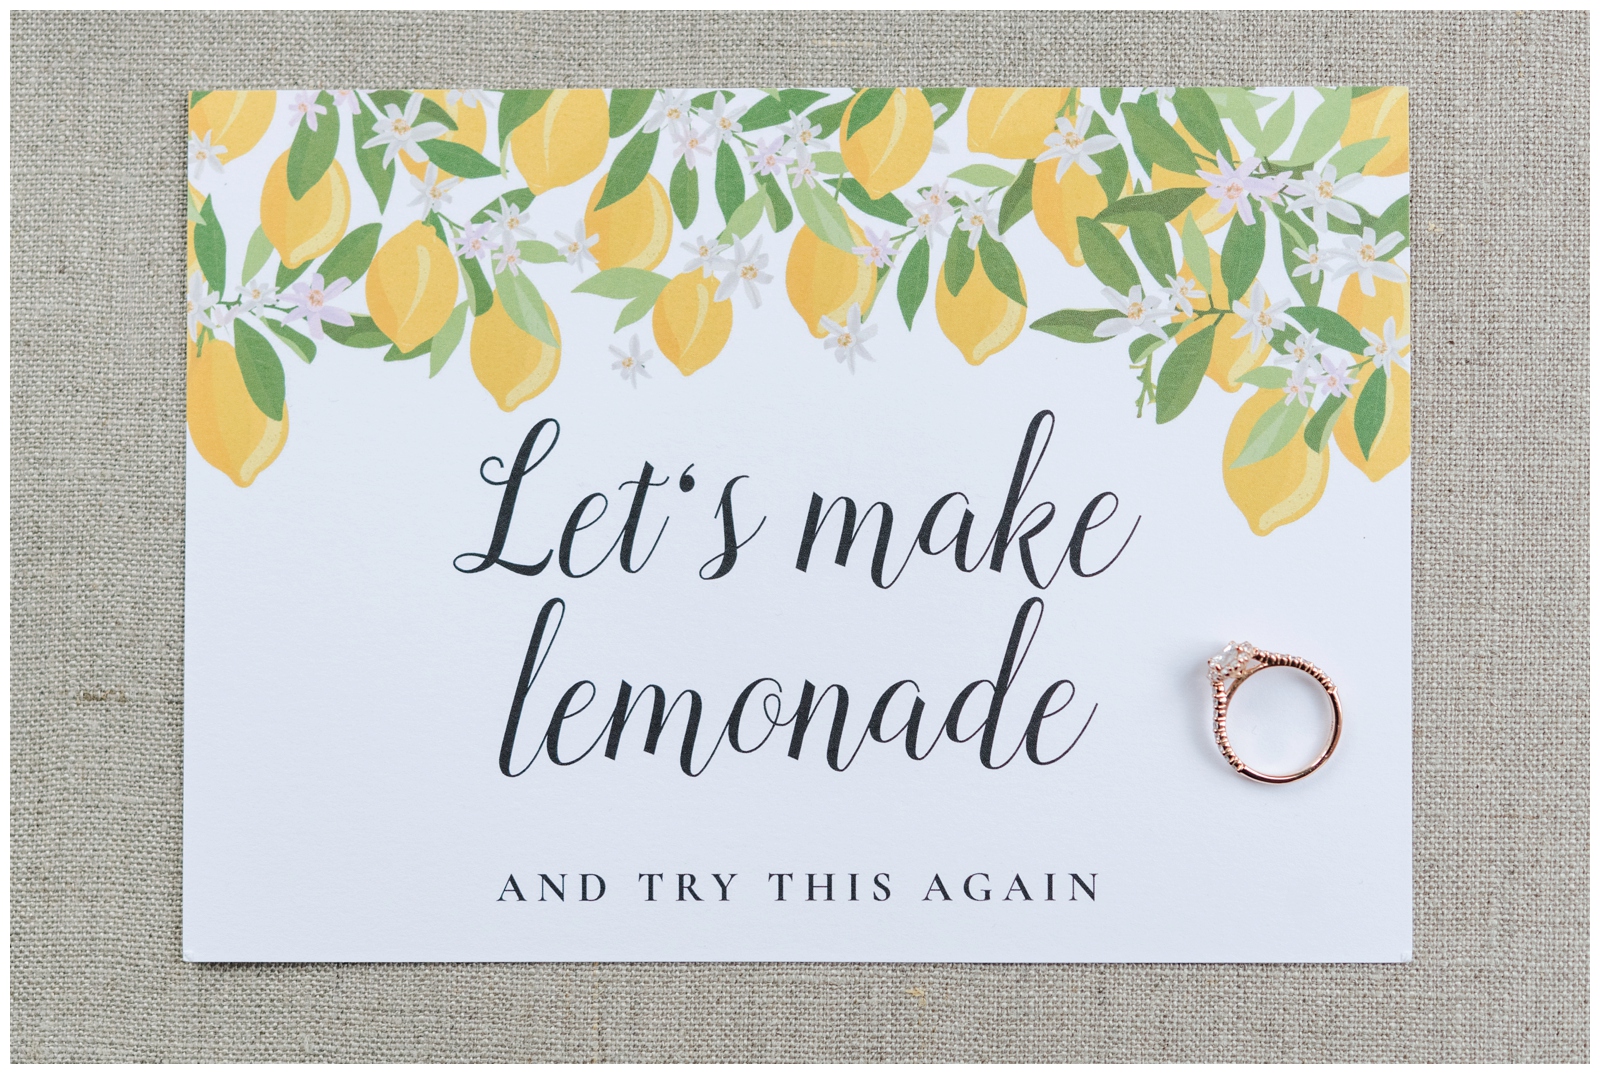 COVID-19 rescheduling wedding invitation with lemons and ring